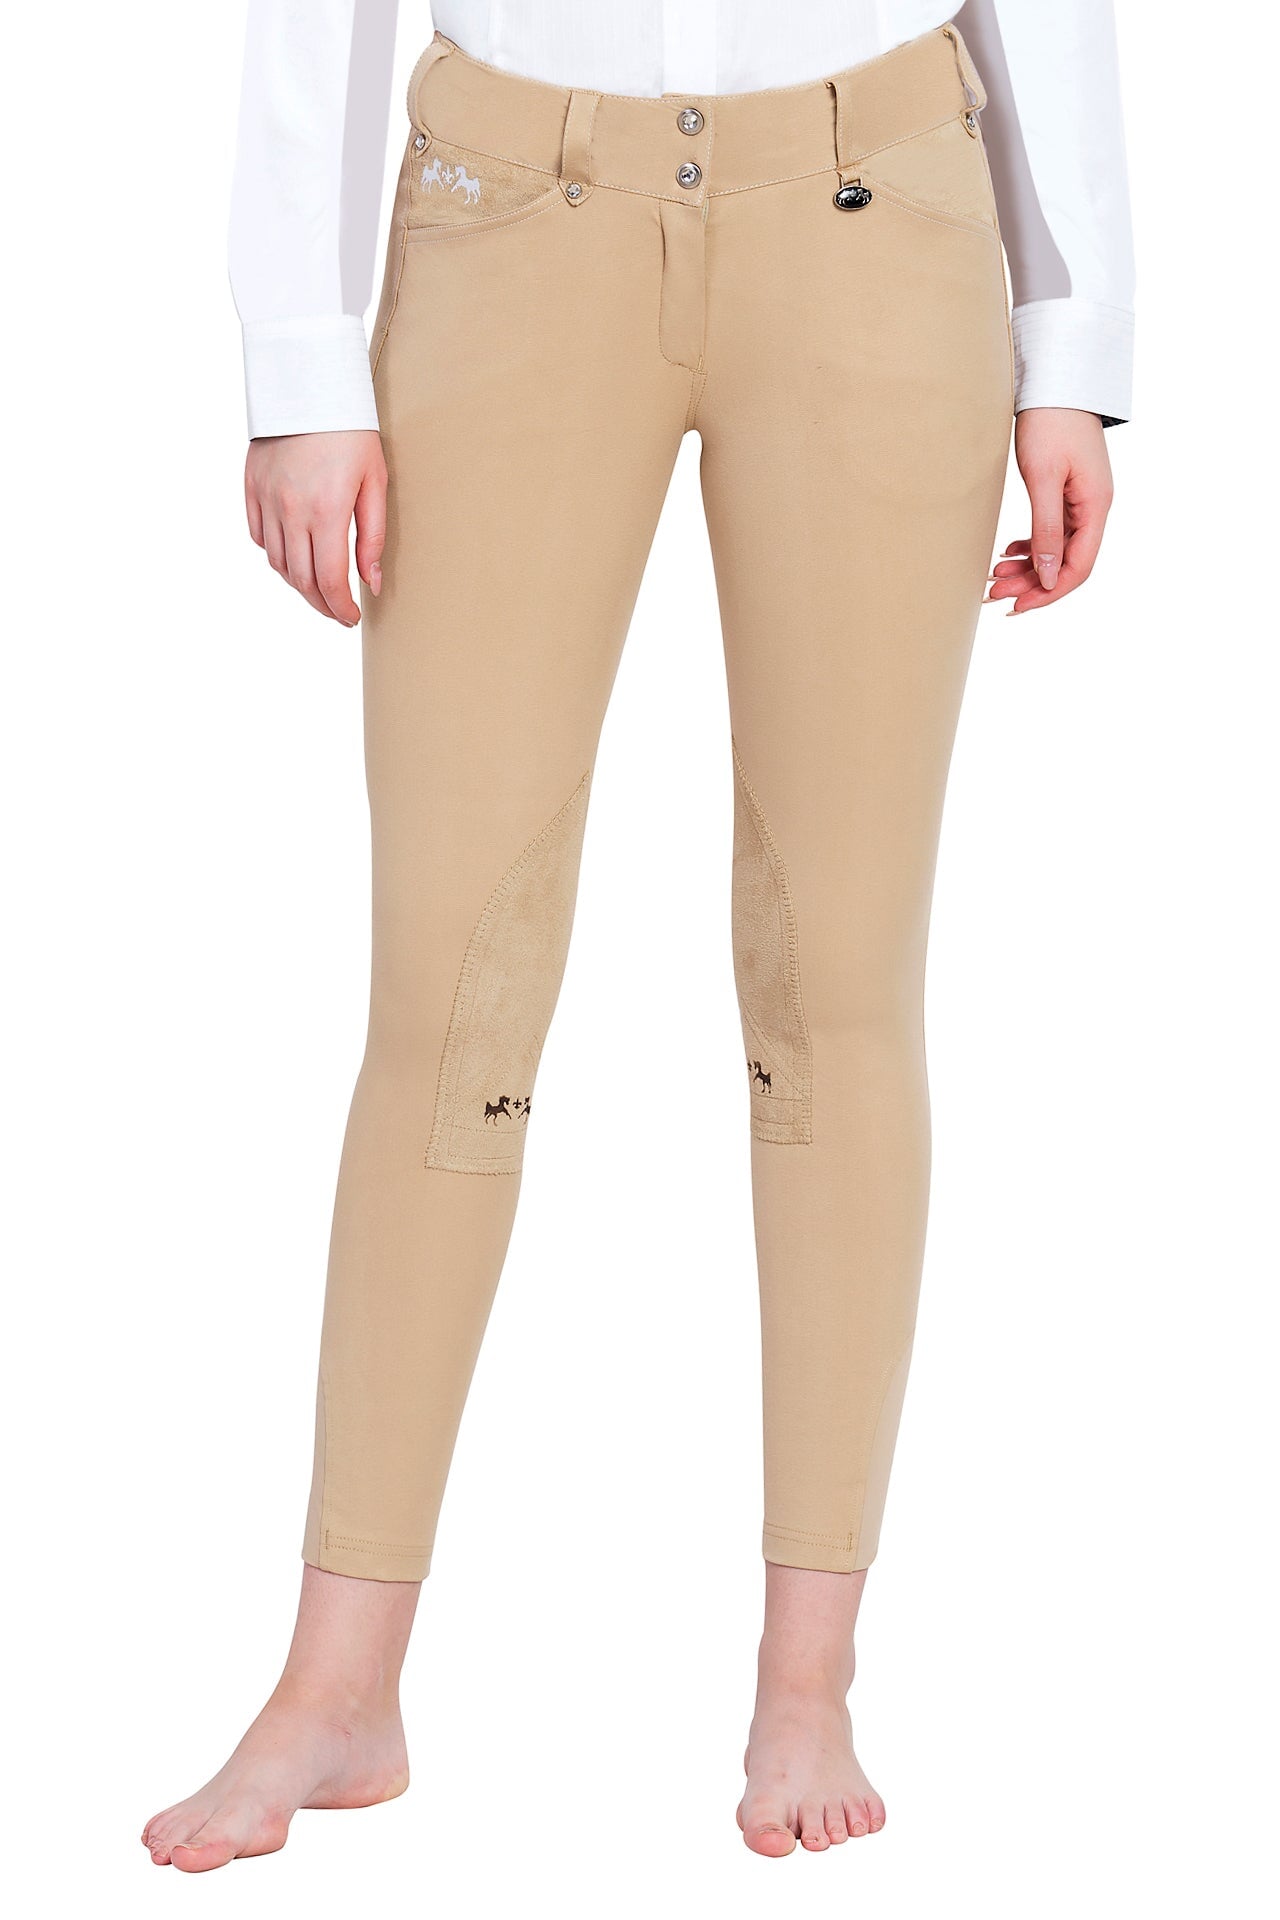 Equine Couture Ladies Blakely Knee Patch Breeches - Breeches.com